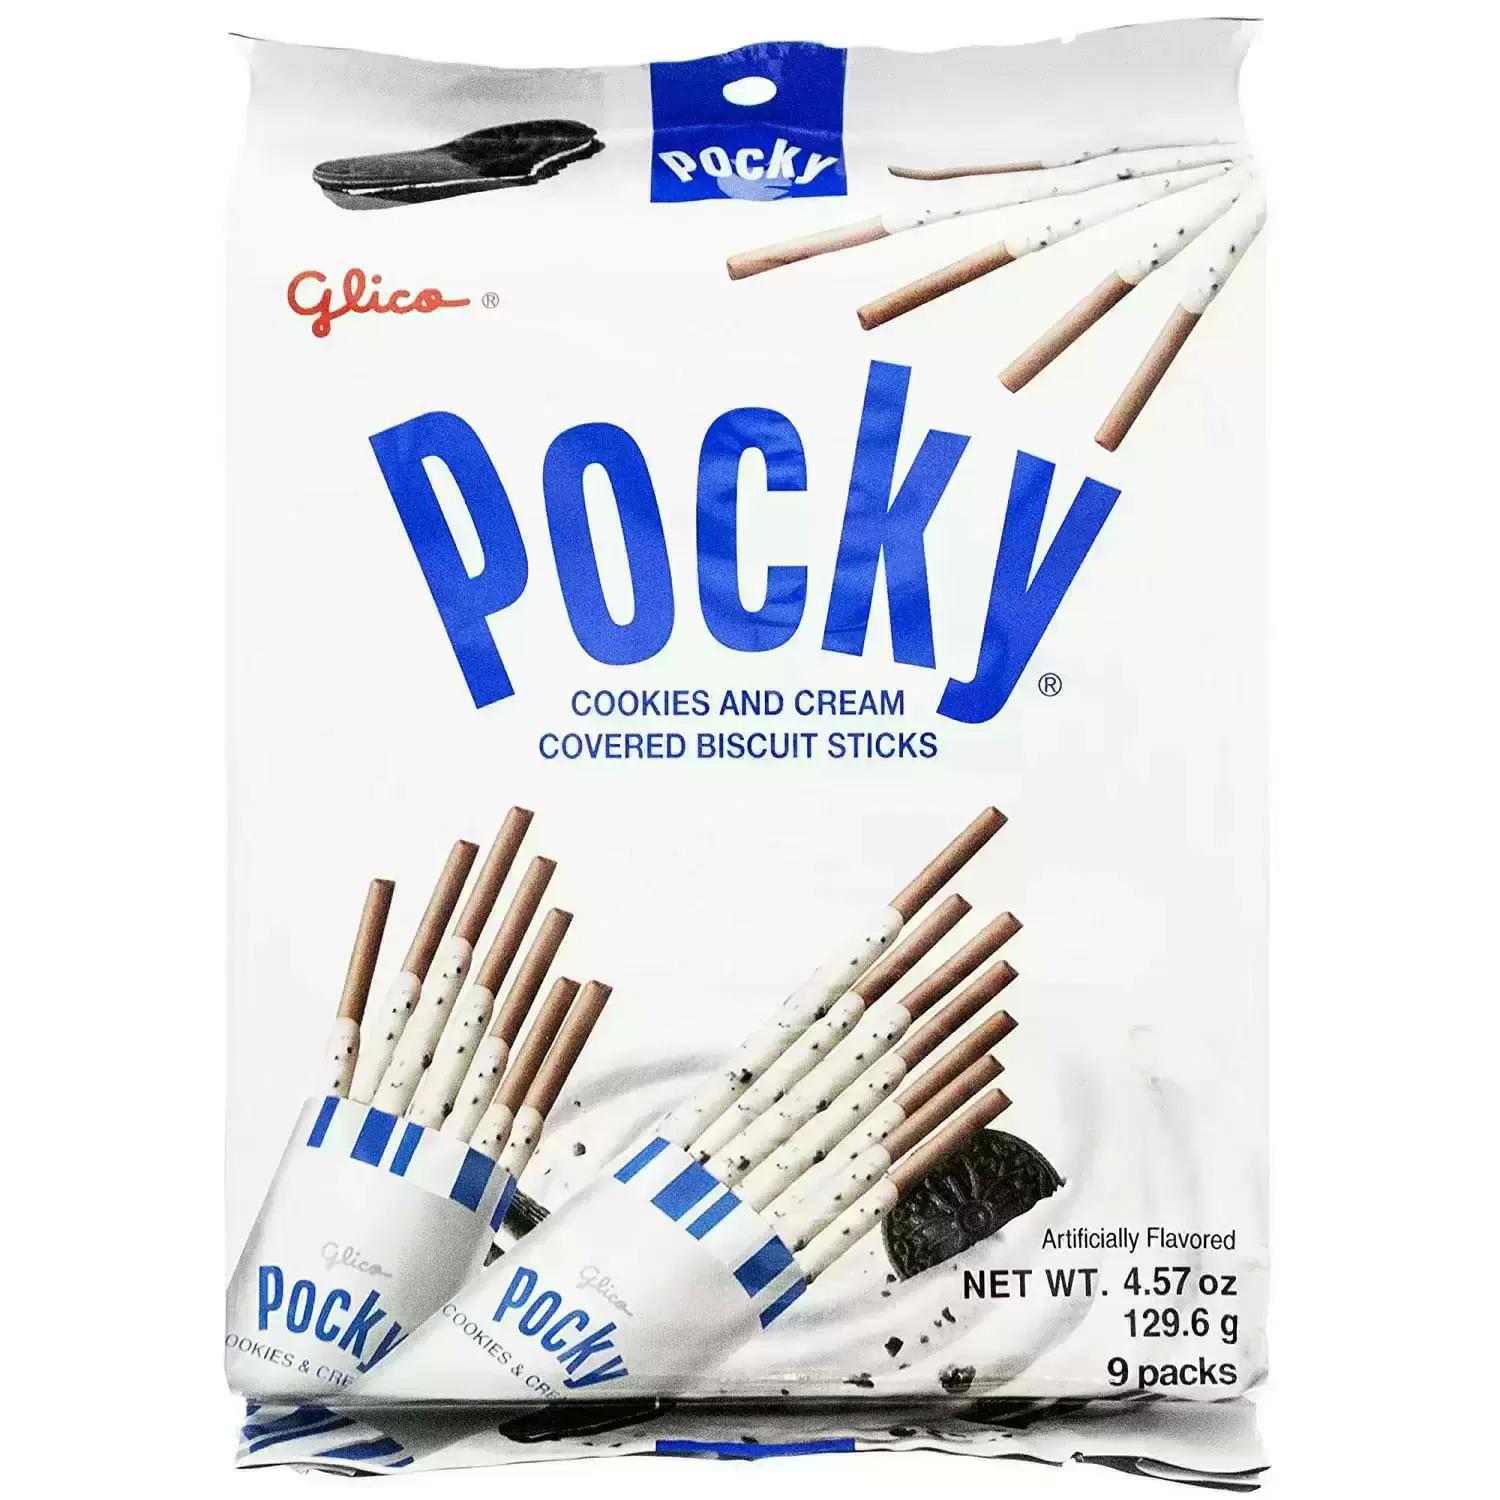 9 Glico Pocky Cookies and Cream Covered Biscuit Sticks for $3.31 Shipped